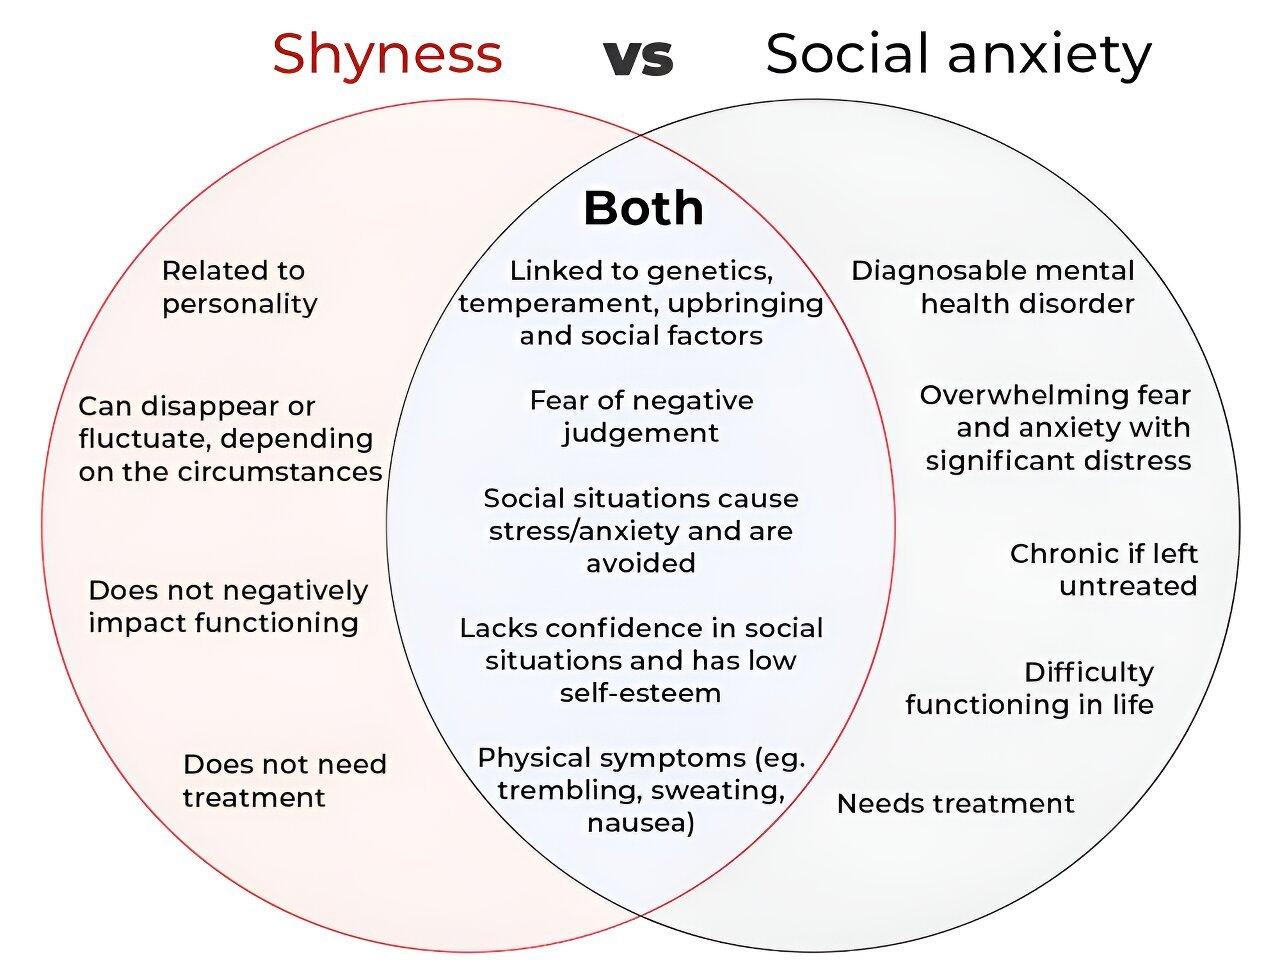 What’s the difference between shyness and social anxiety?